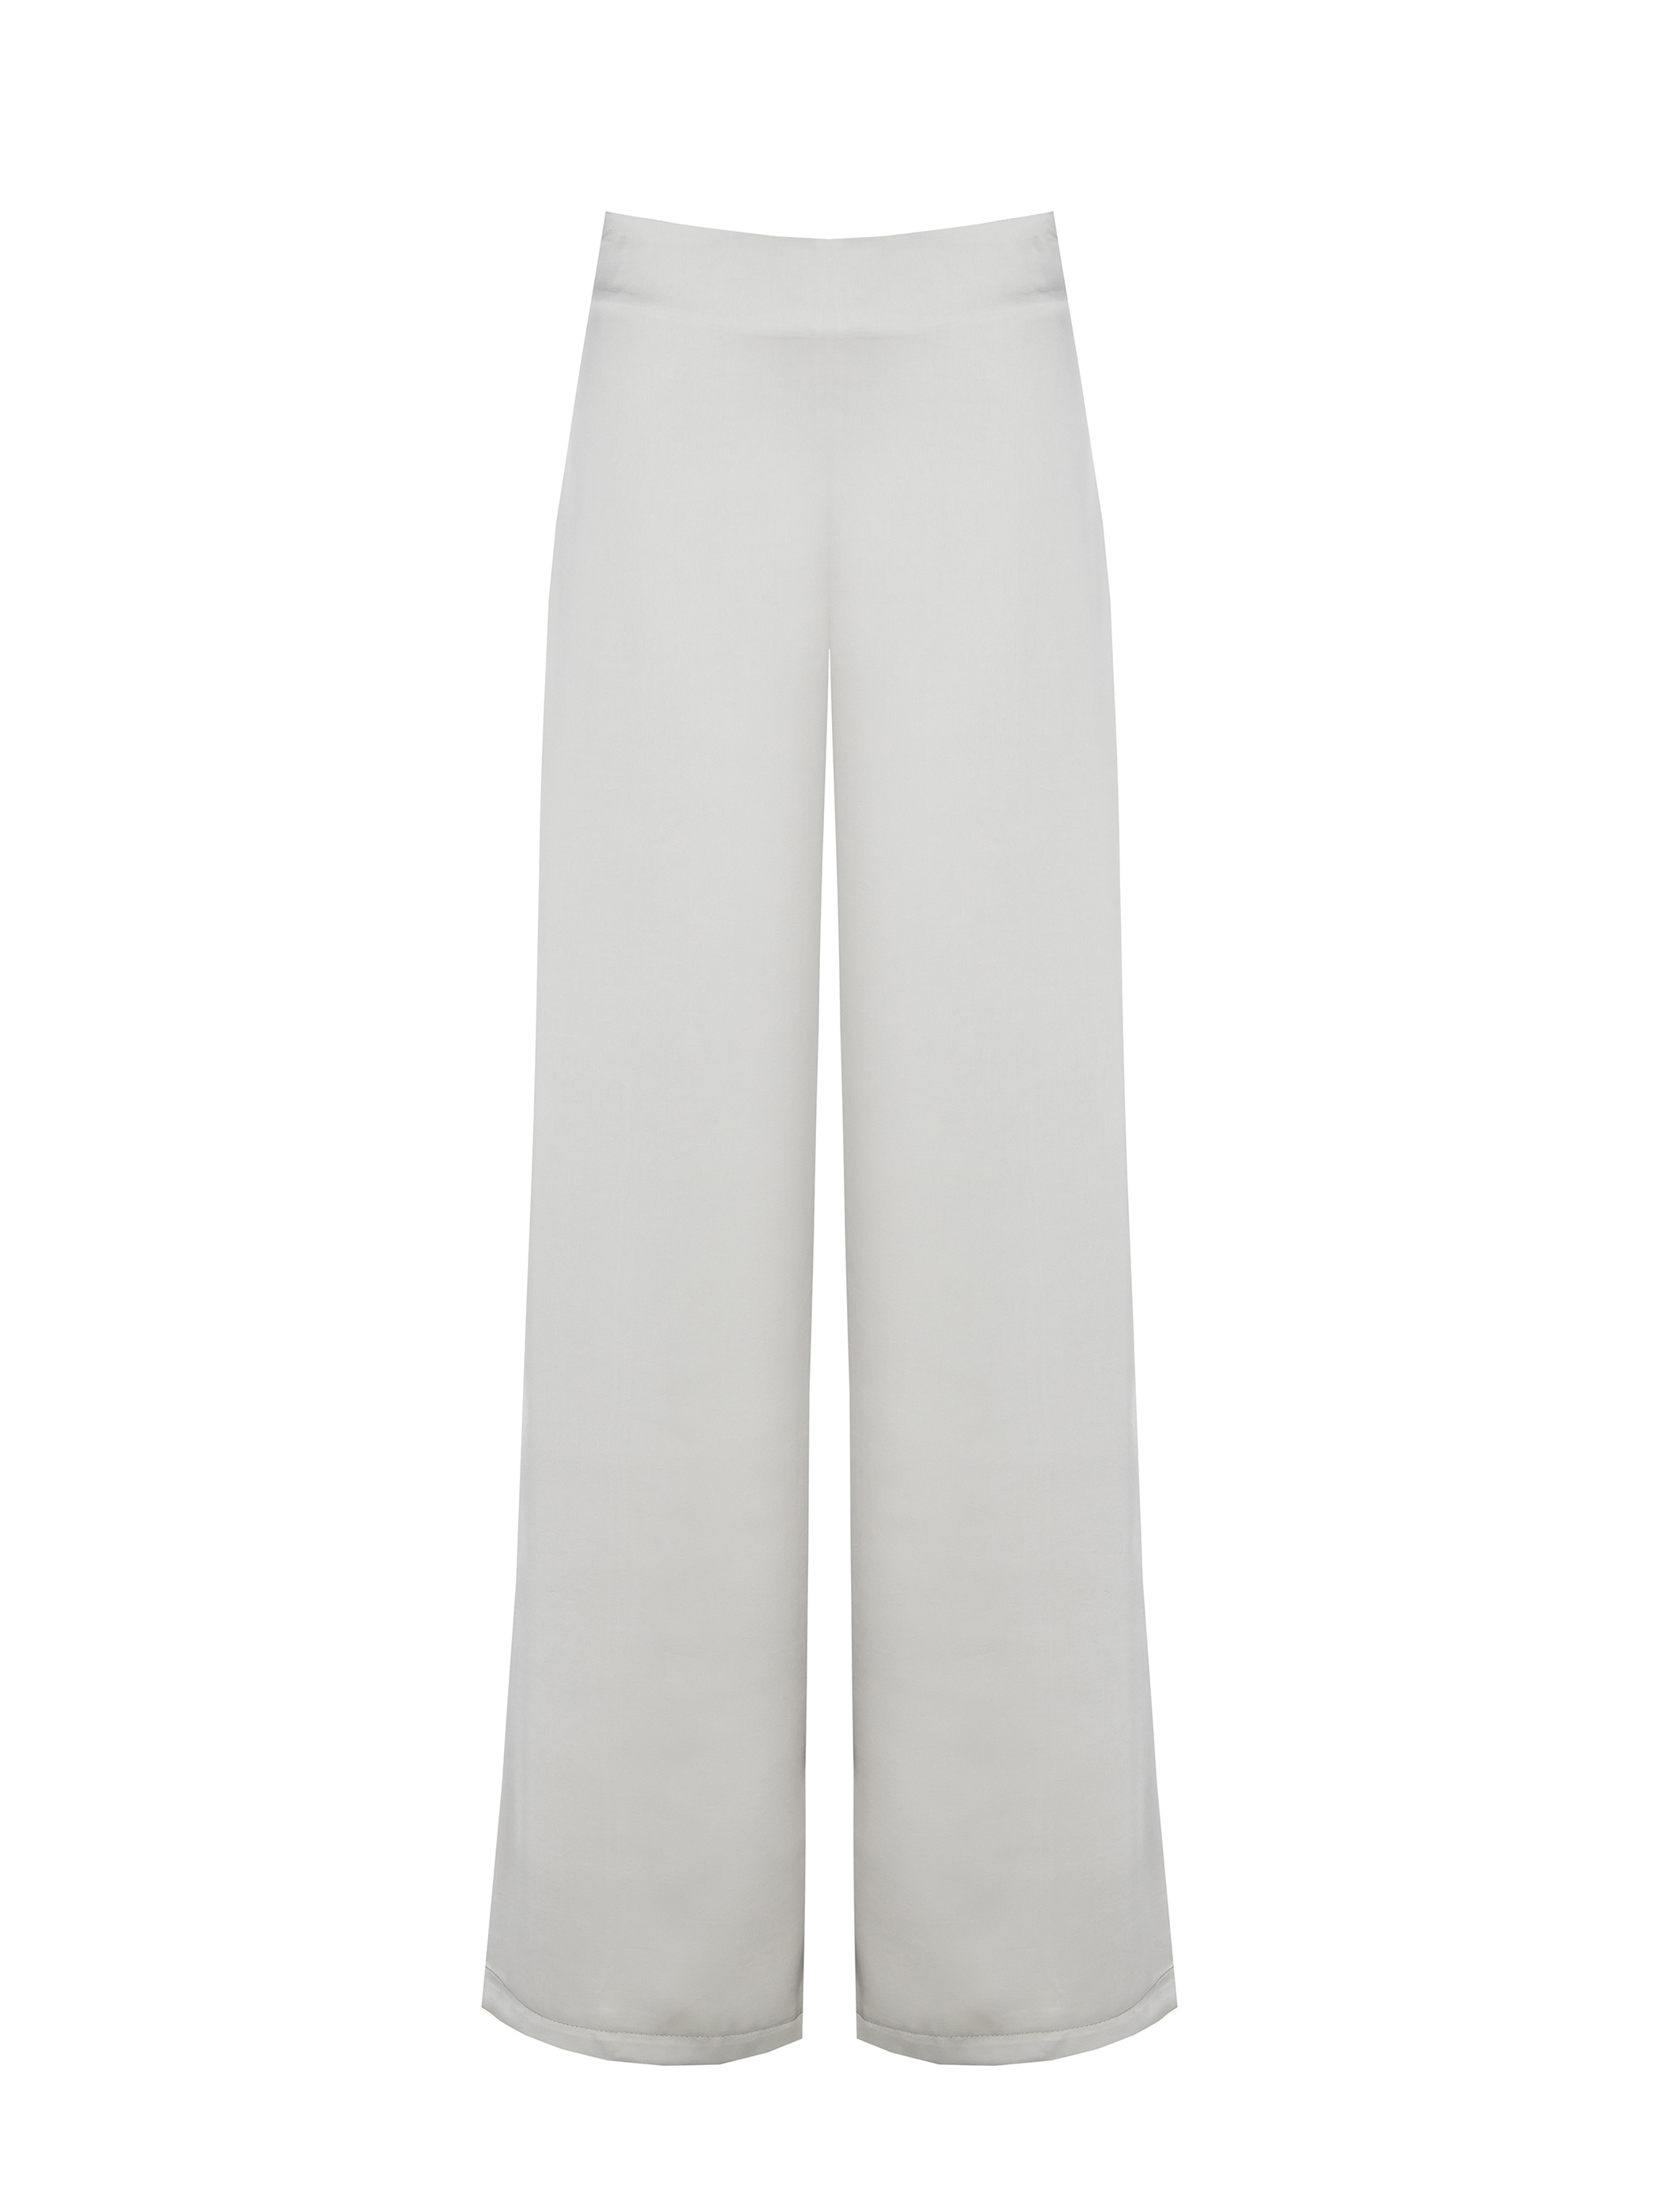 PALAZZO TROUSERS IN SATIN